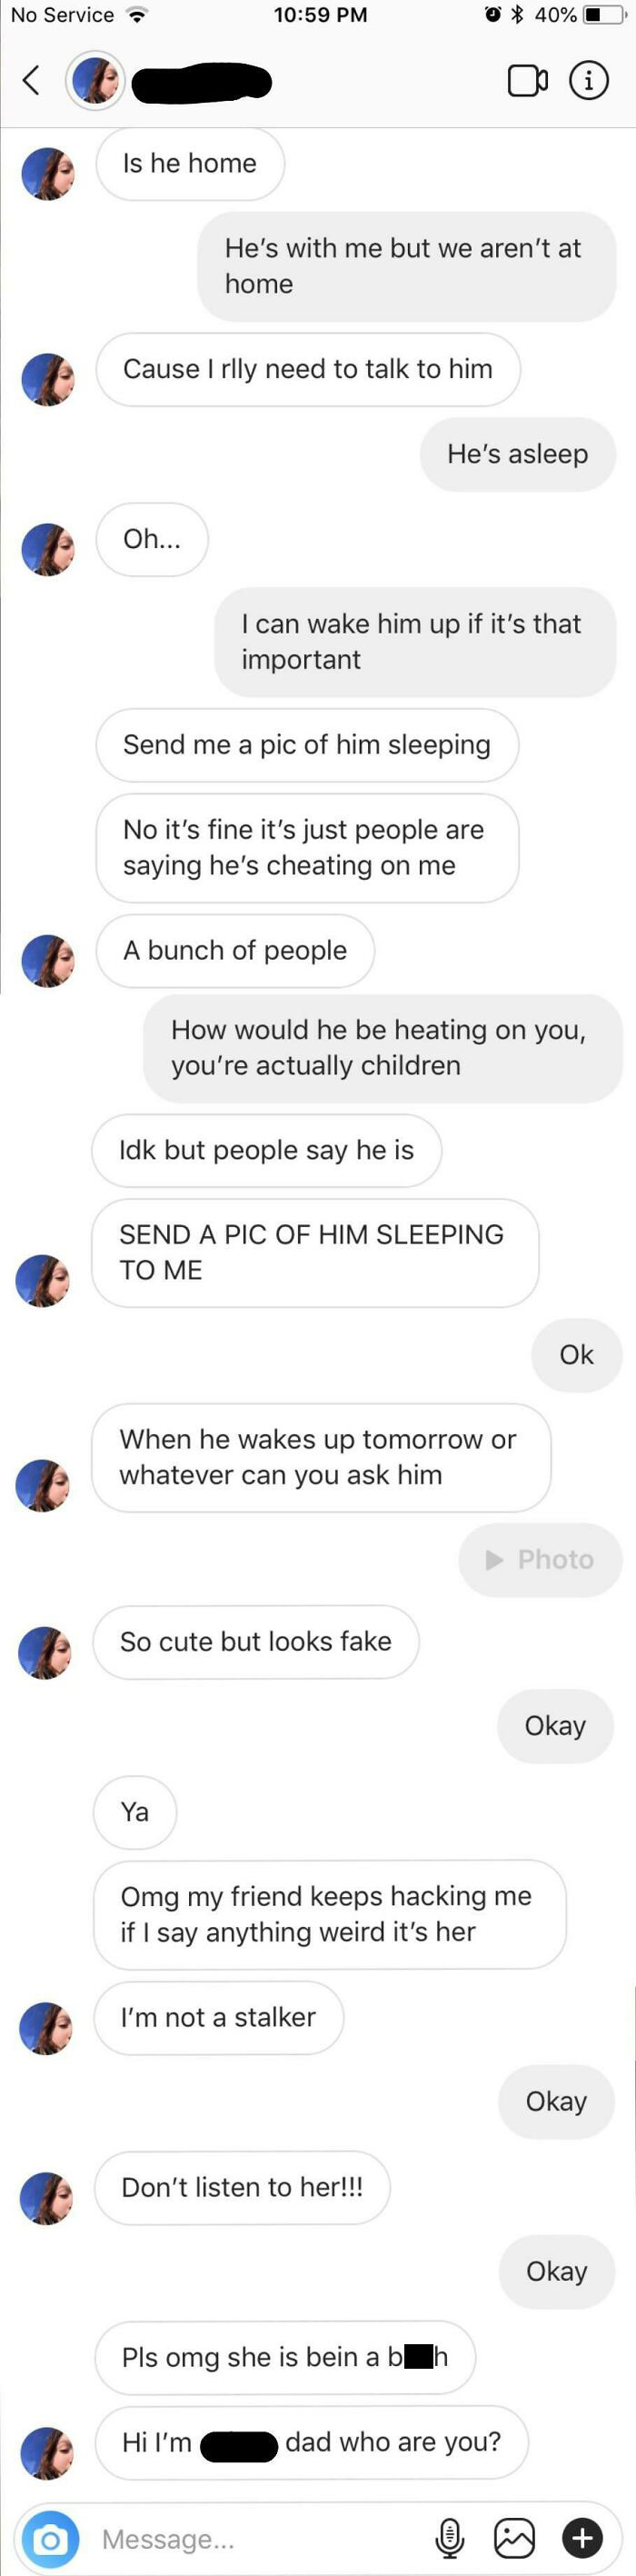 My 12 Year Old Brothers “Girlfriend” Wants To Talk To Him, He Doesn’t Want To Talk To Her And Asks Me To Pretend He’s Asleep (He Told Me To Send The Photo)